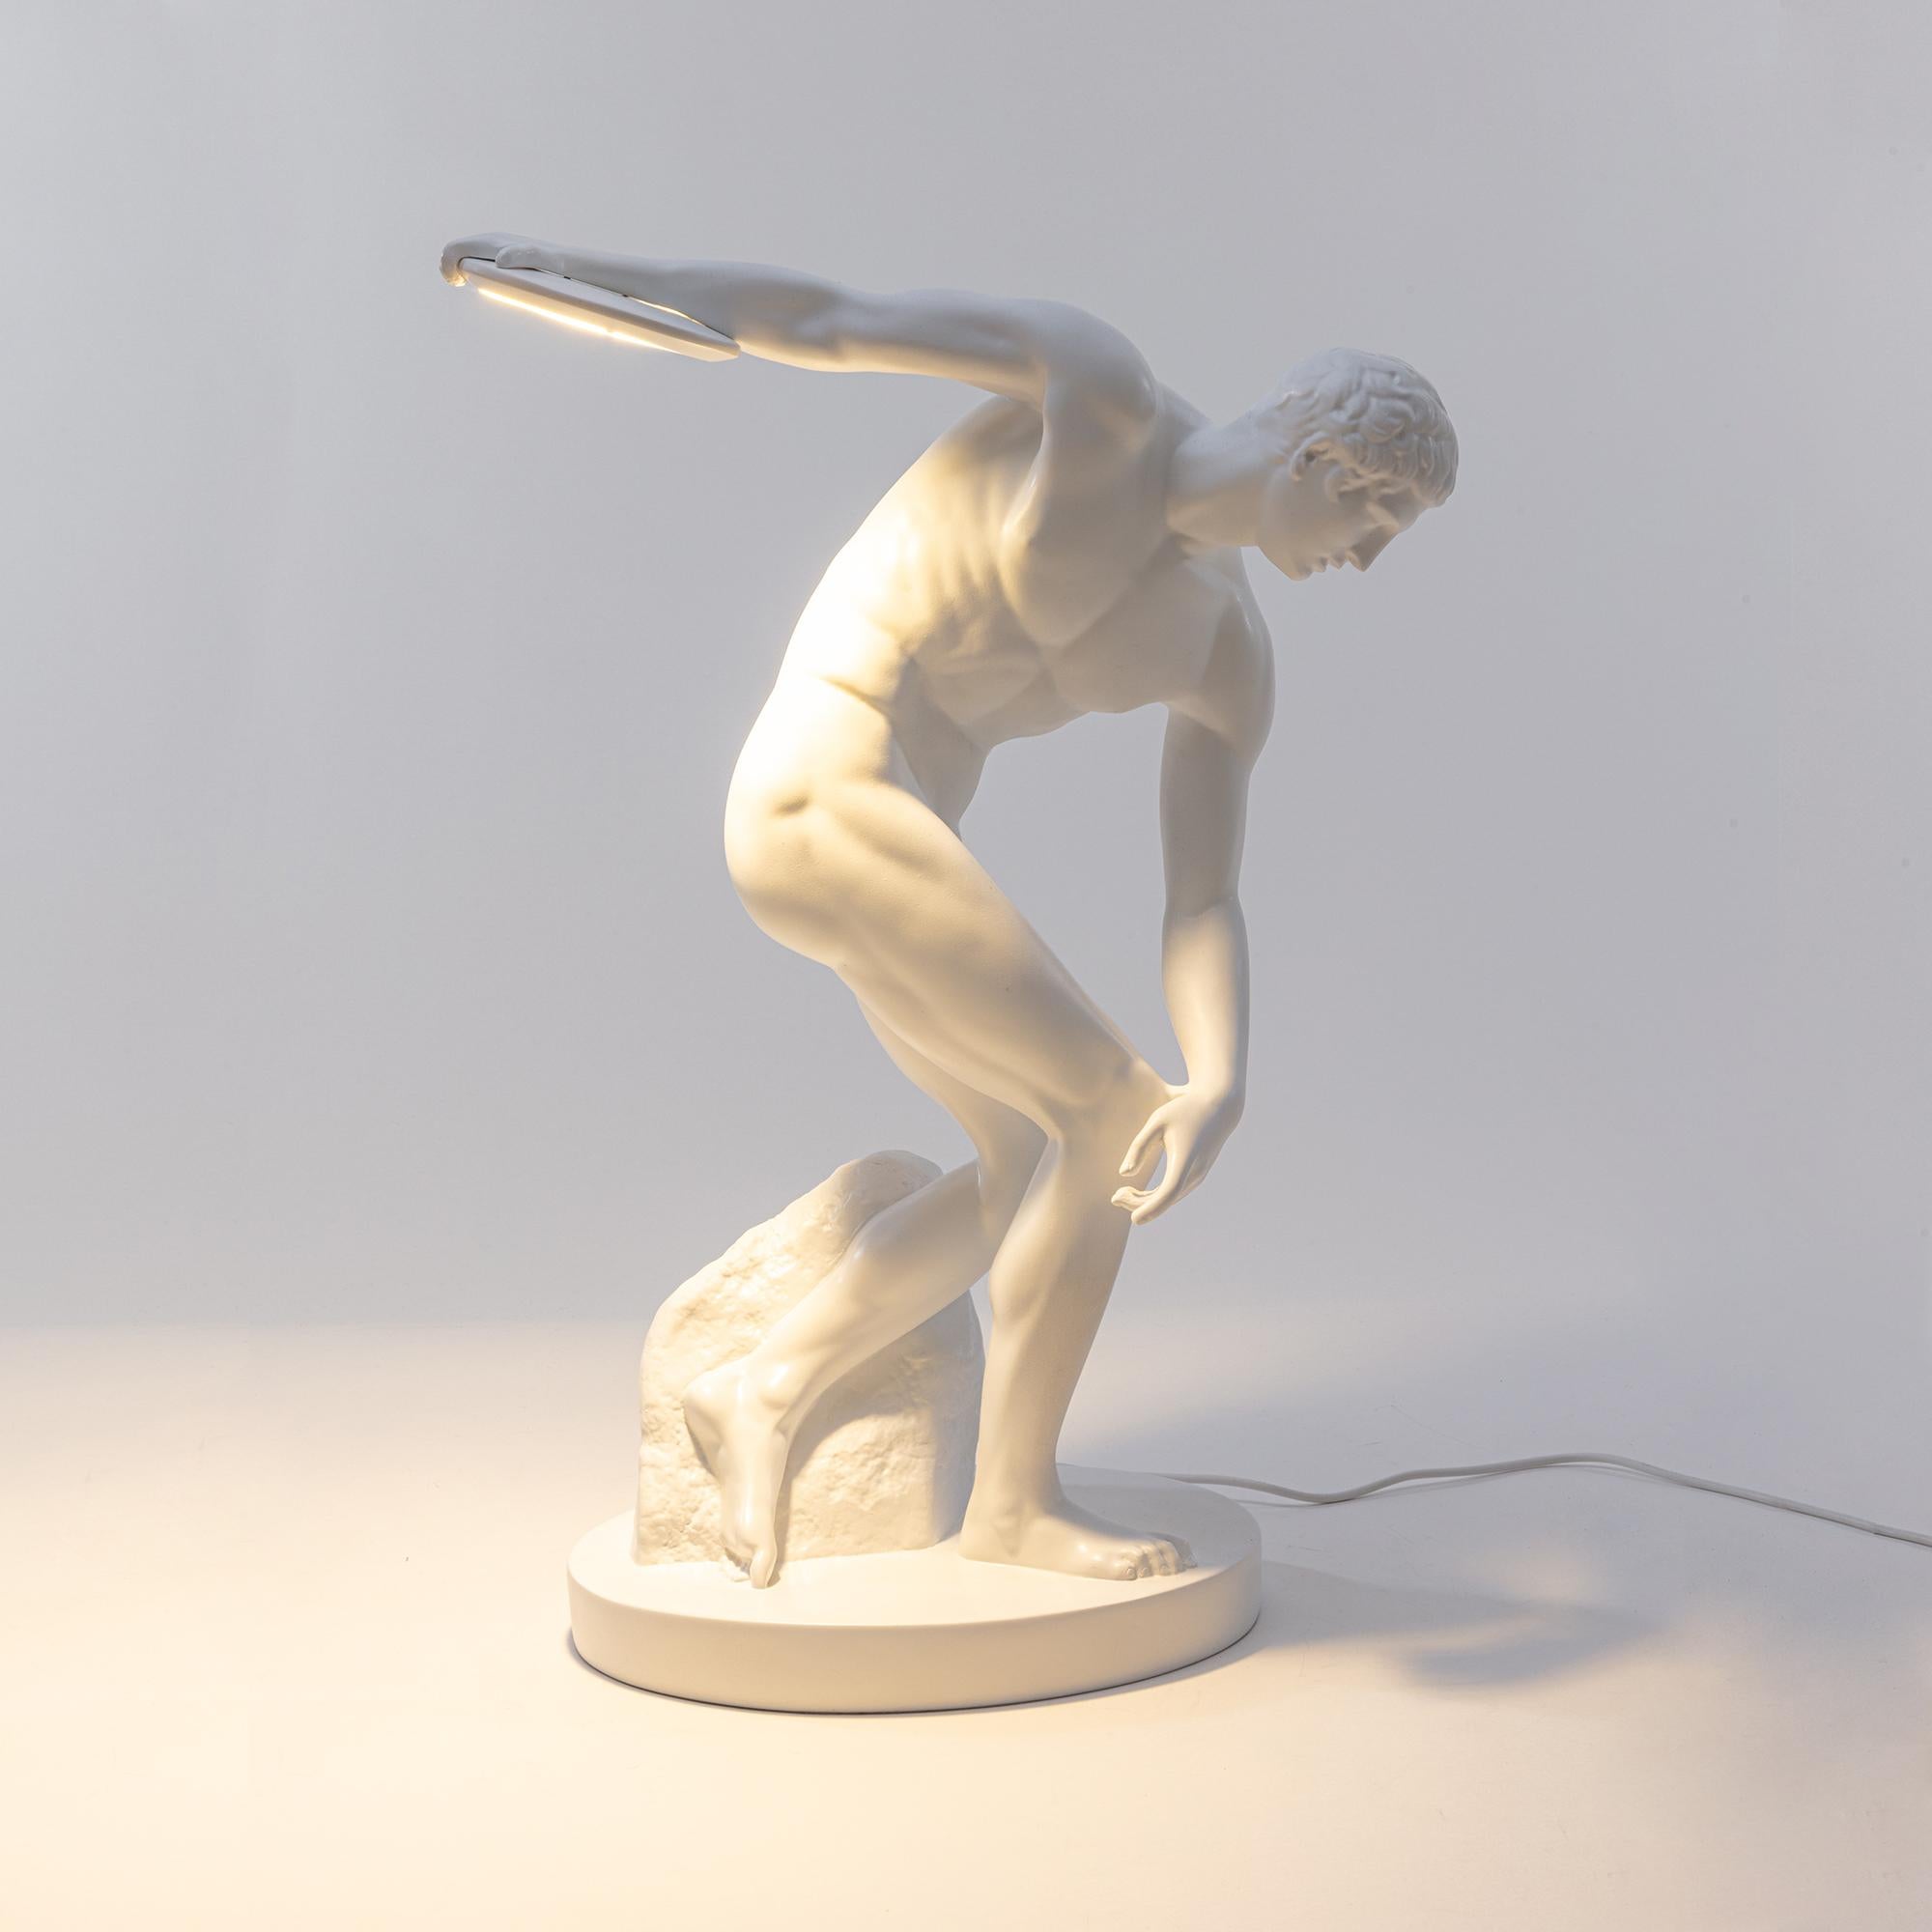 The iconic Greek sculpture immortalized moments before the launch and enriched with an unexpected light source.
A perfect marriage between history and contemporaneity.
LED Lamp